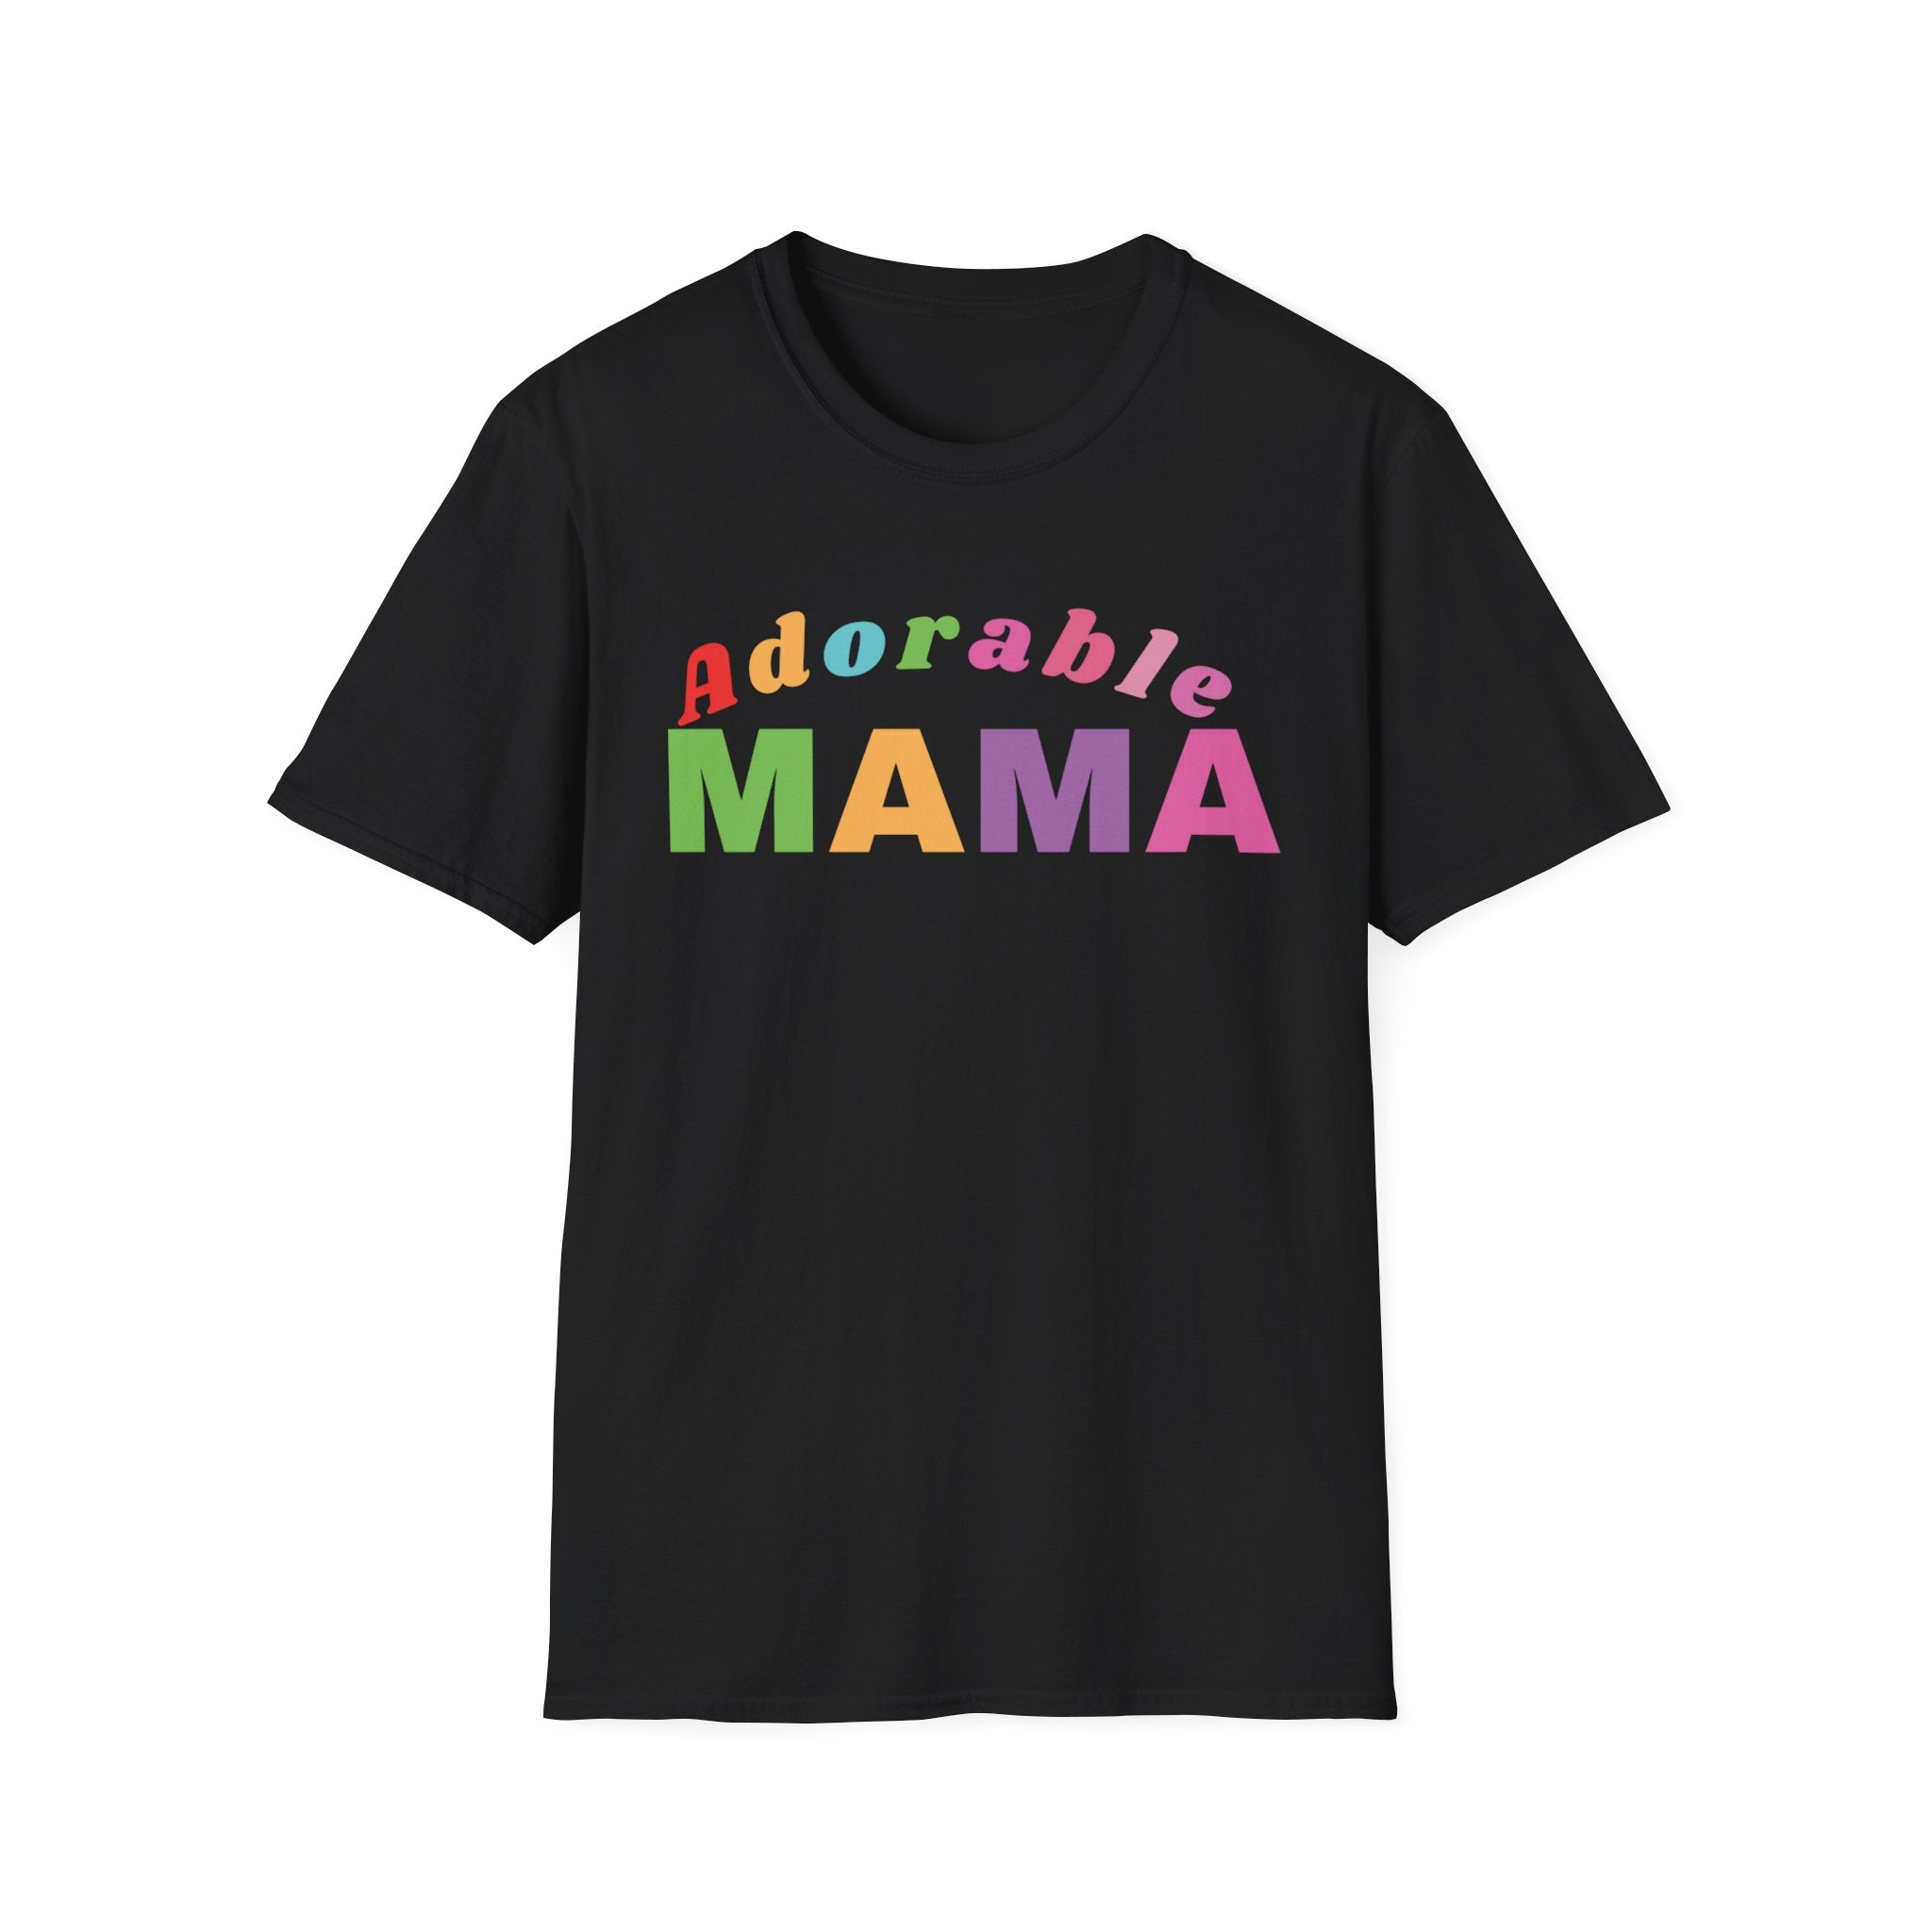 Adorable Mama Unisex Softstyle Crew Neck T-Shirt, Mom Shirt, Gift for Mom, Mother's Day Gift, Gift for Sister, Gift for Wife, Gift for Friend